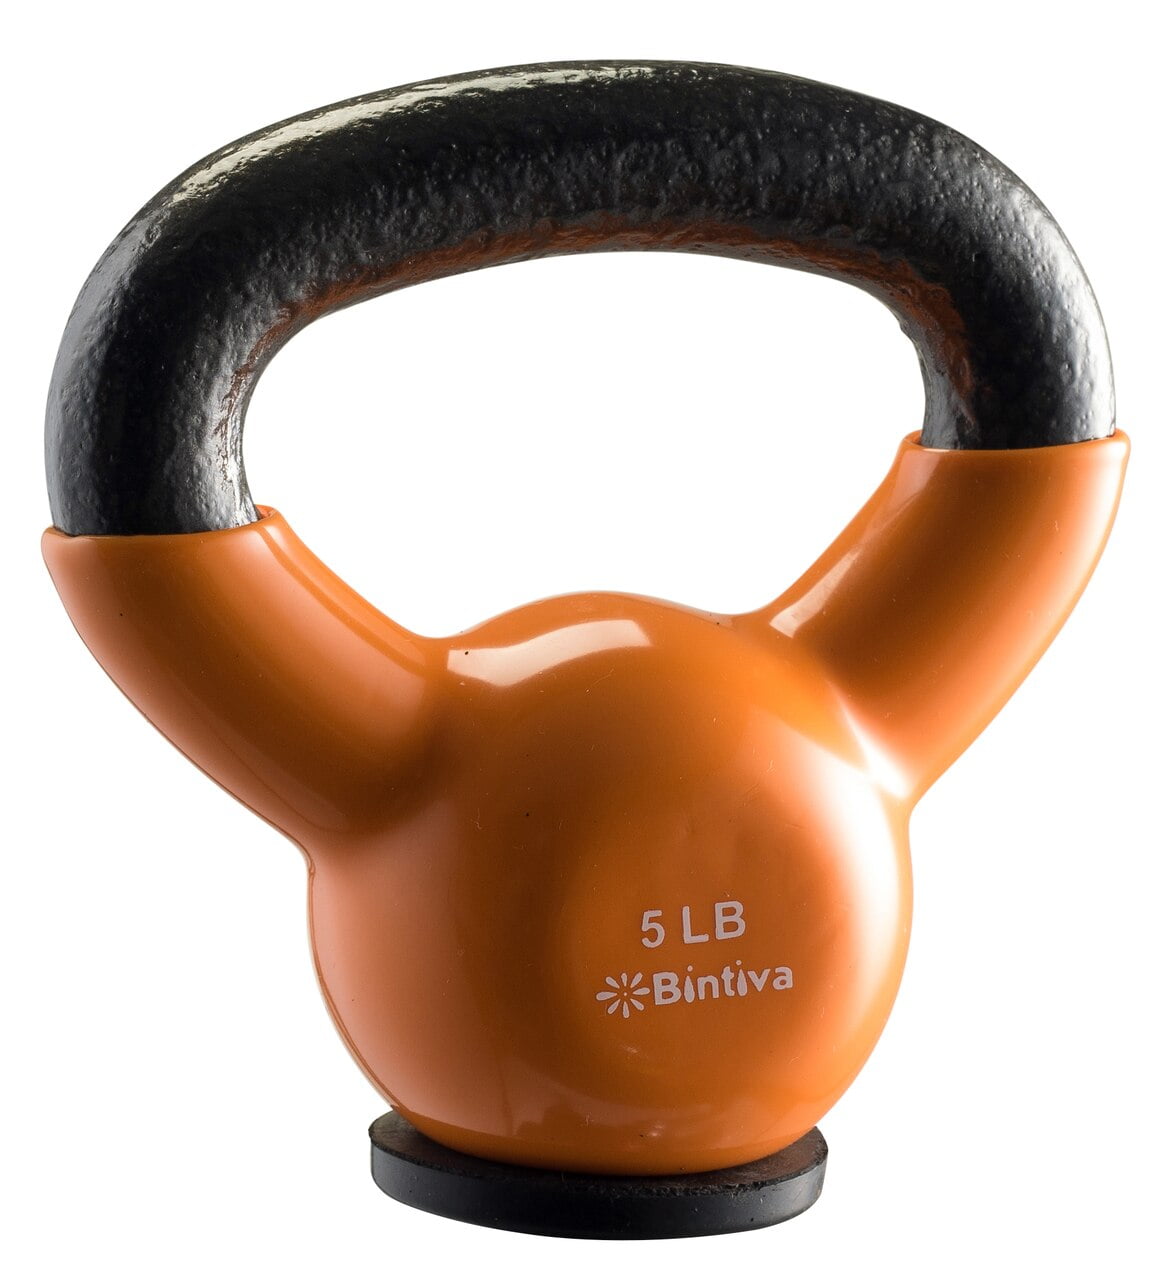 Kettlebell Weight Set 5 10 15lbs with Stand │ Gym Crossfit Fitness by BodyRip 